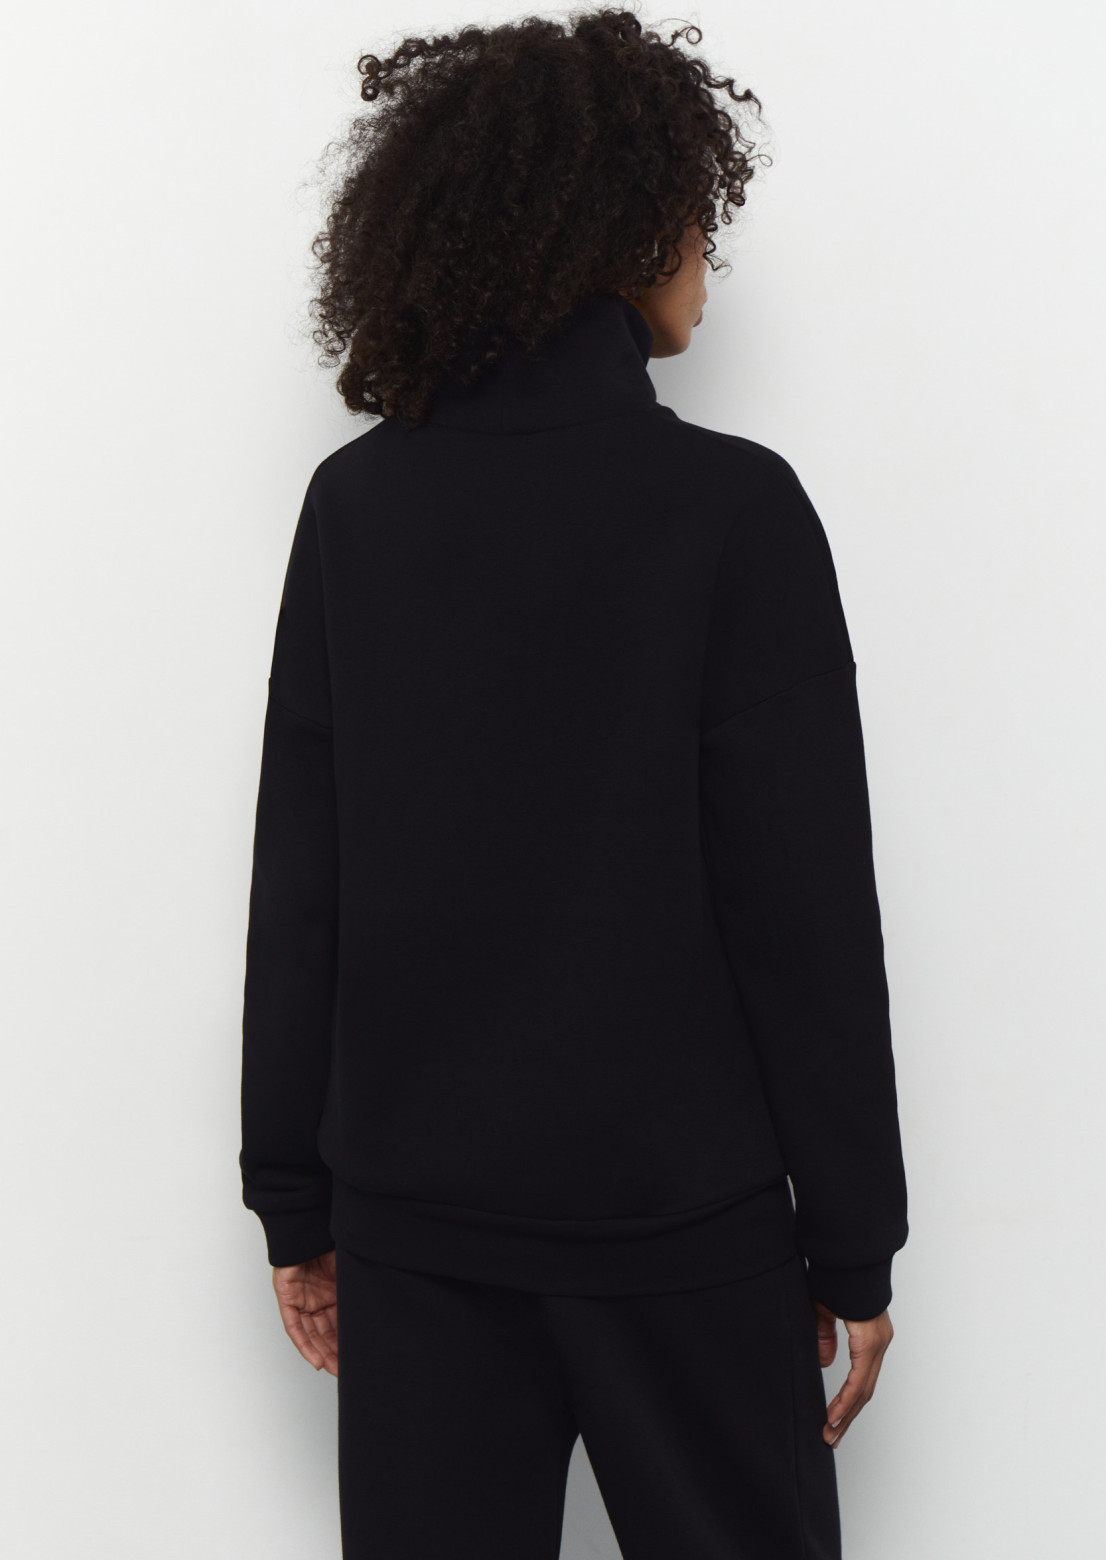 Black color three-thread insulated sweatshirt with a neck